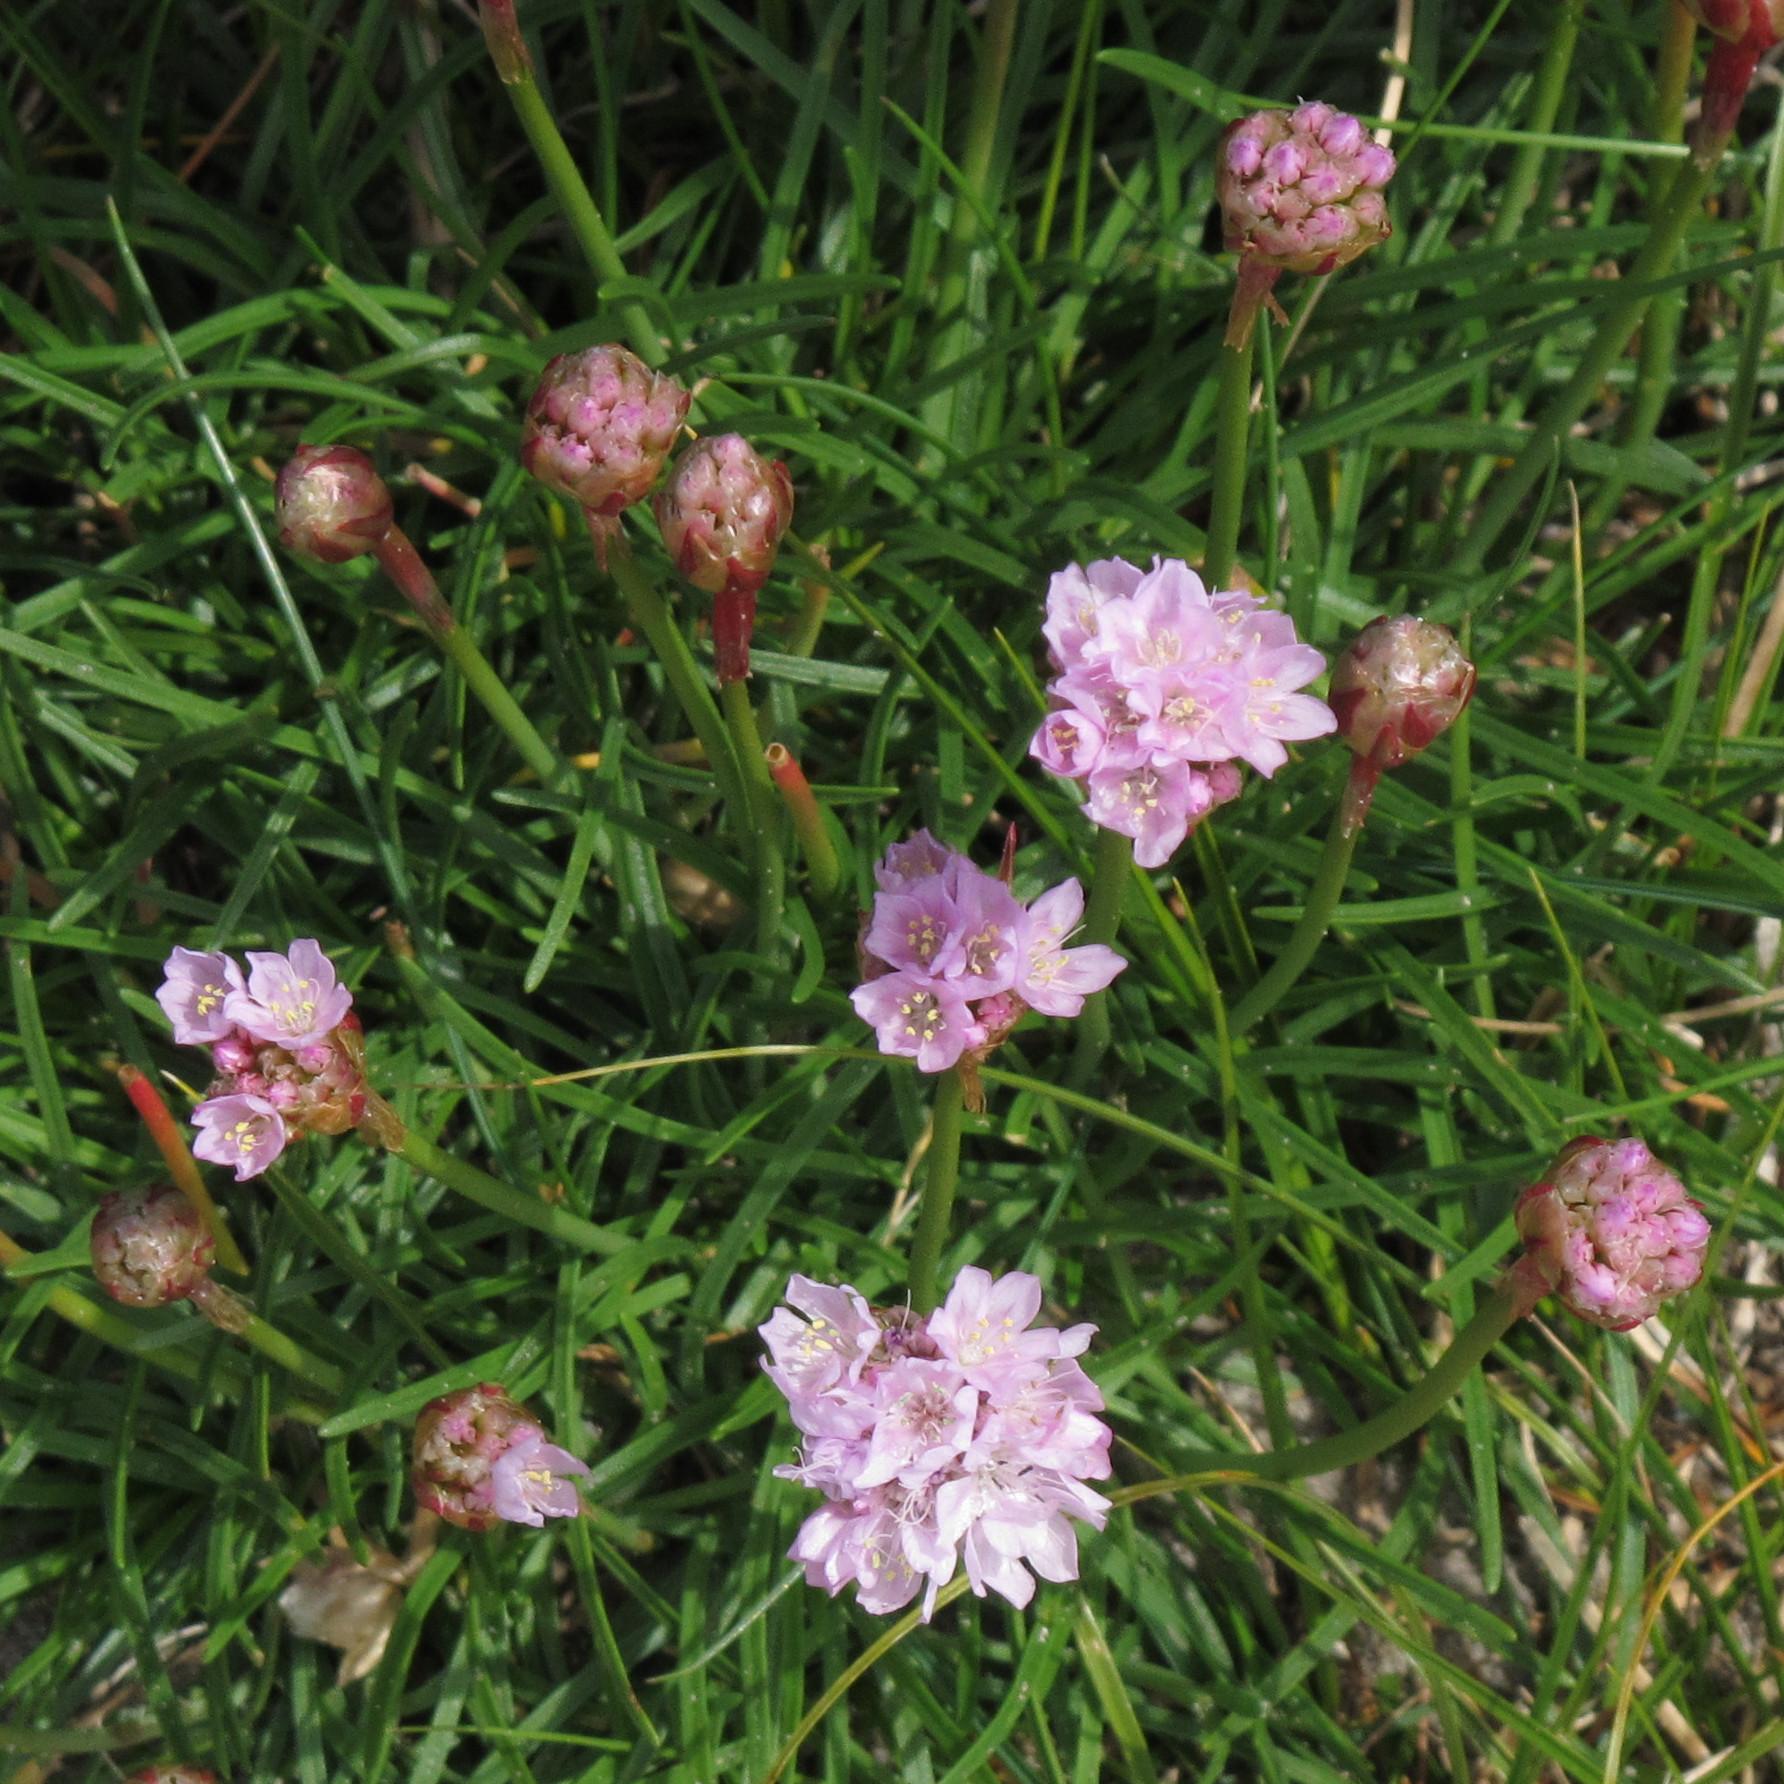 light-purple flowers with yellow anthers, pink-ruby buds, green stems and leaves